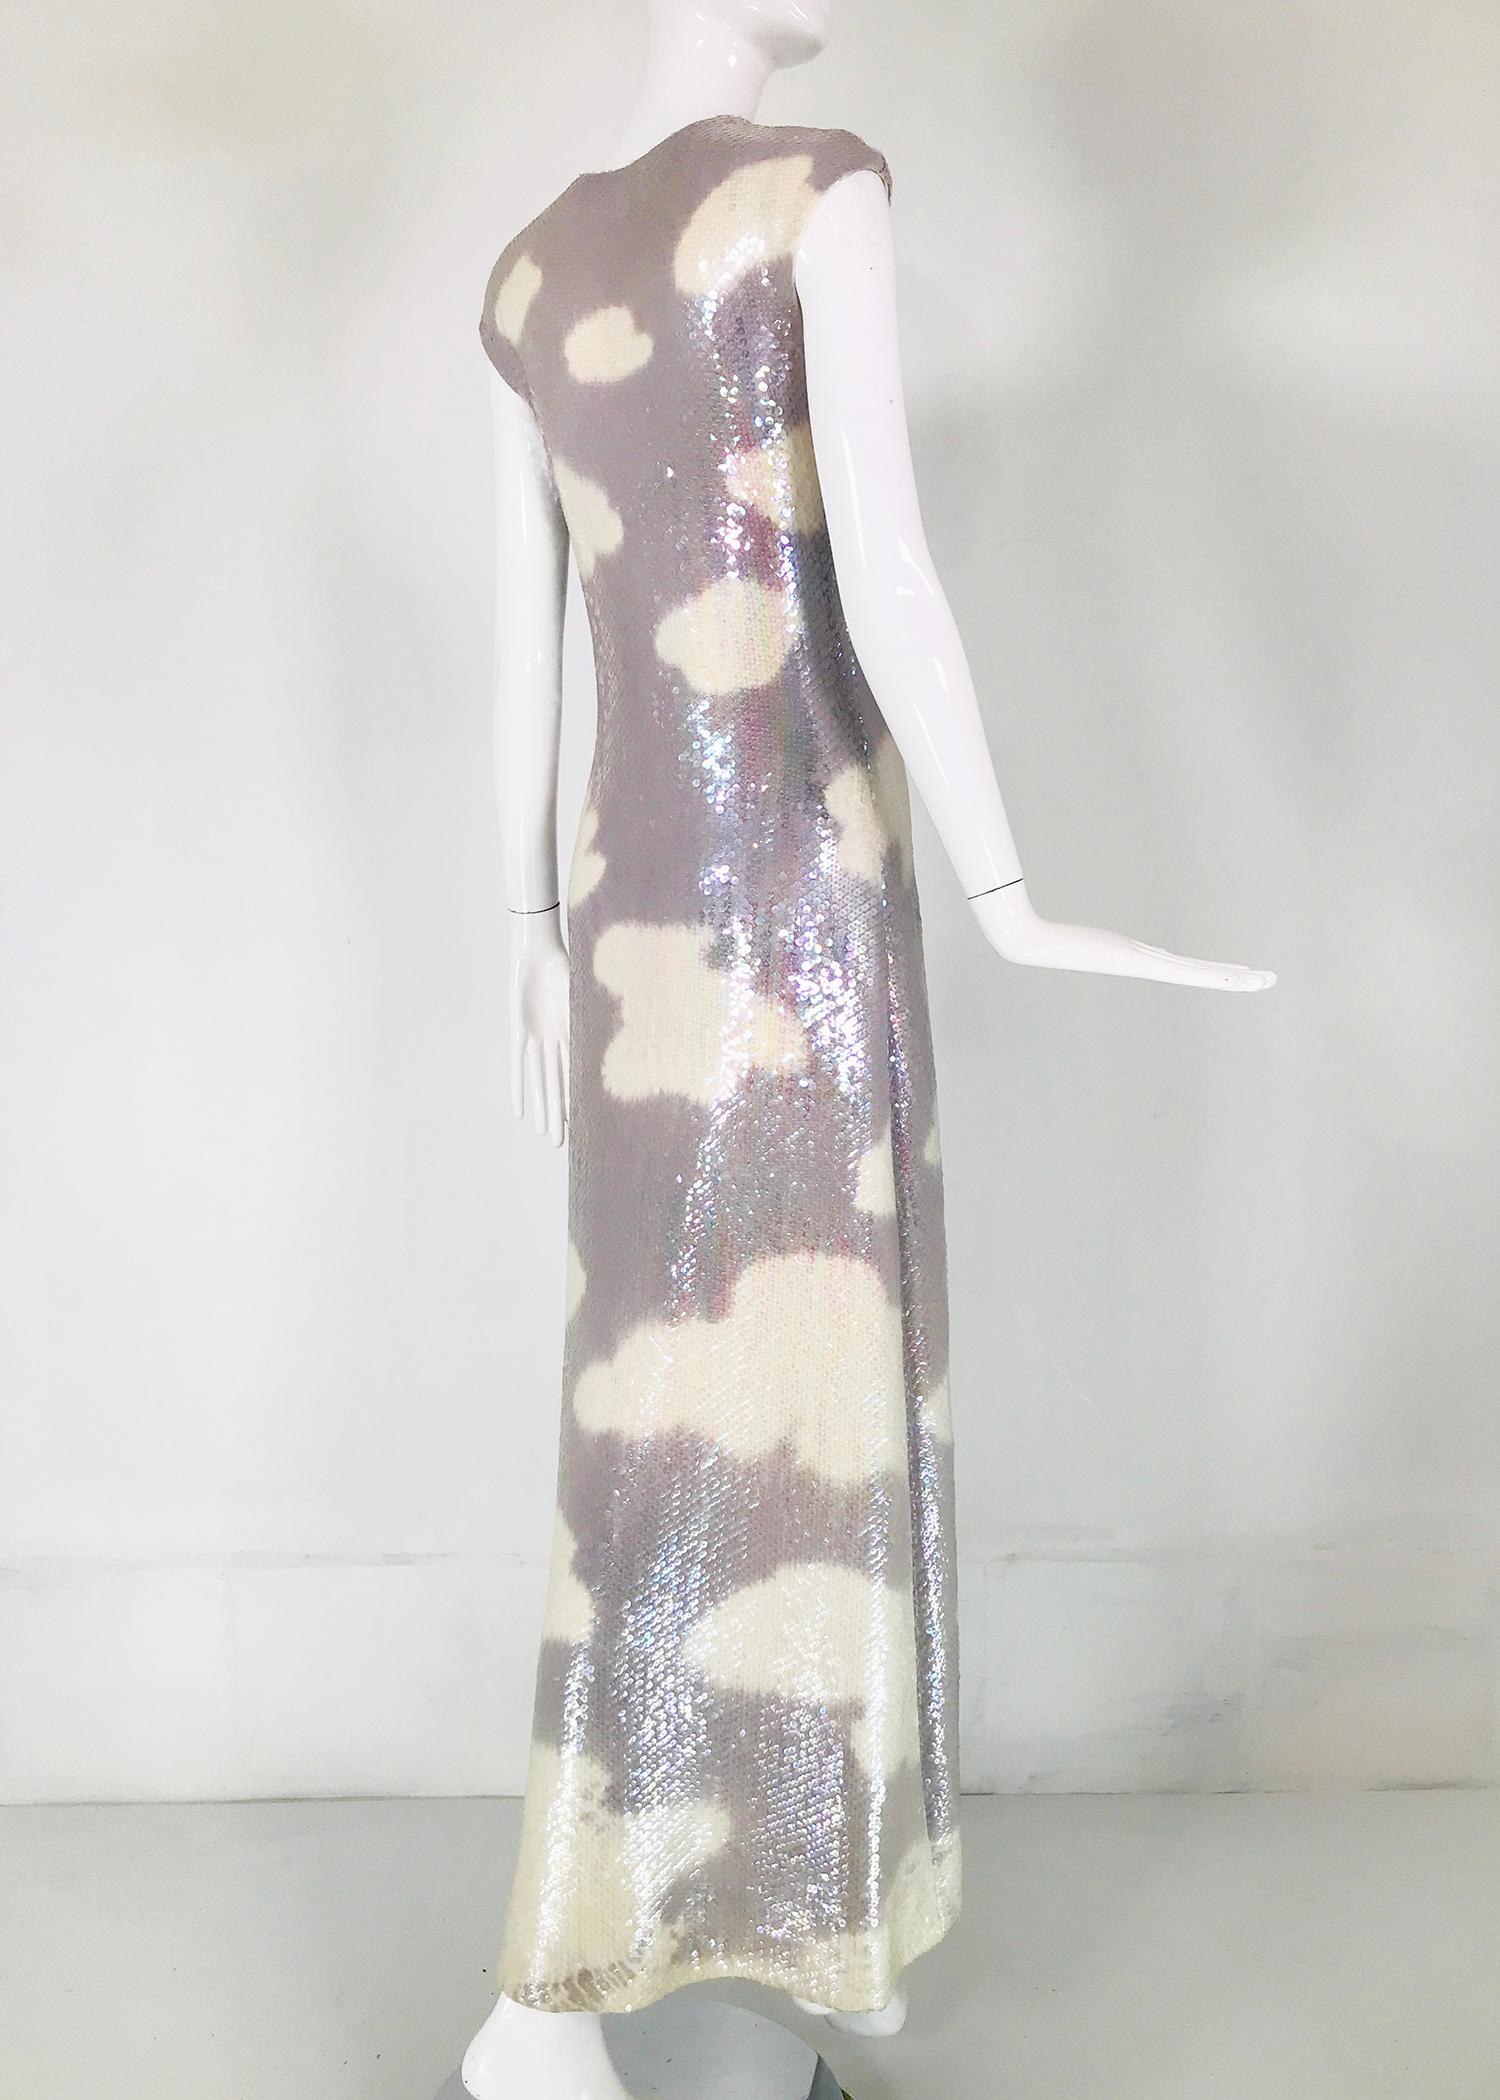 Halston Iconic Clouds Dress in Stormy Grey & Cream Iridescent Sequins Mid 1970s 1